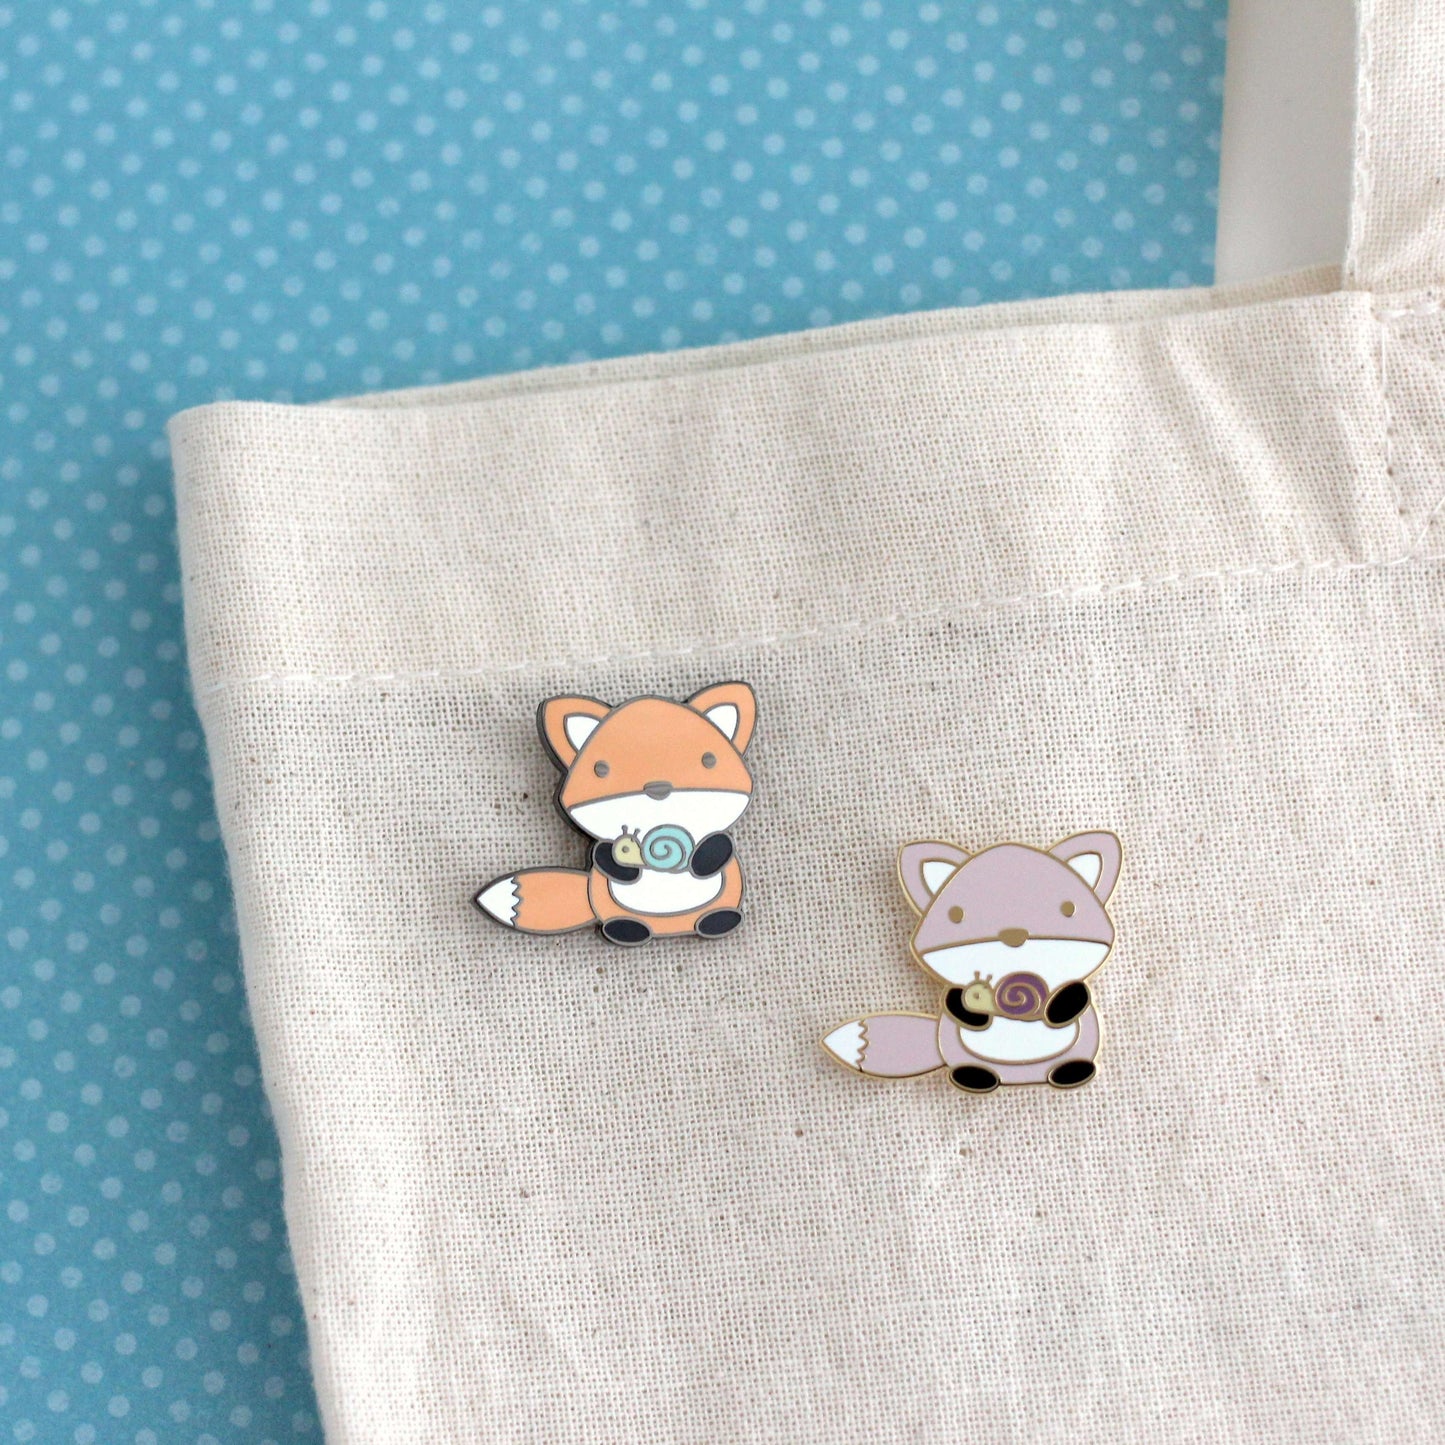 Fox and Snail Enamel Pin (Pink Variant) - Cute Pin - Animal Gift by Wild Whimsy Woolies